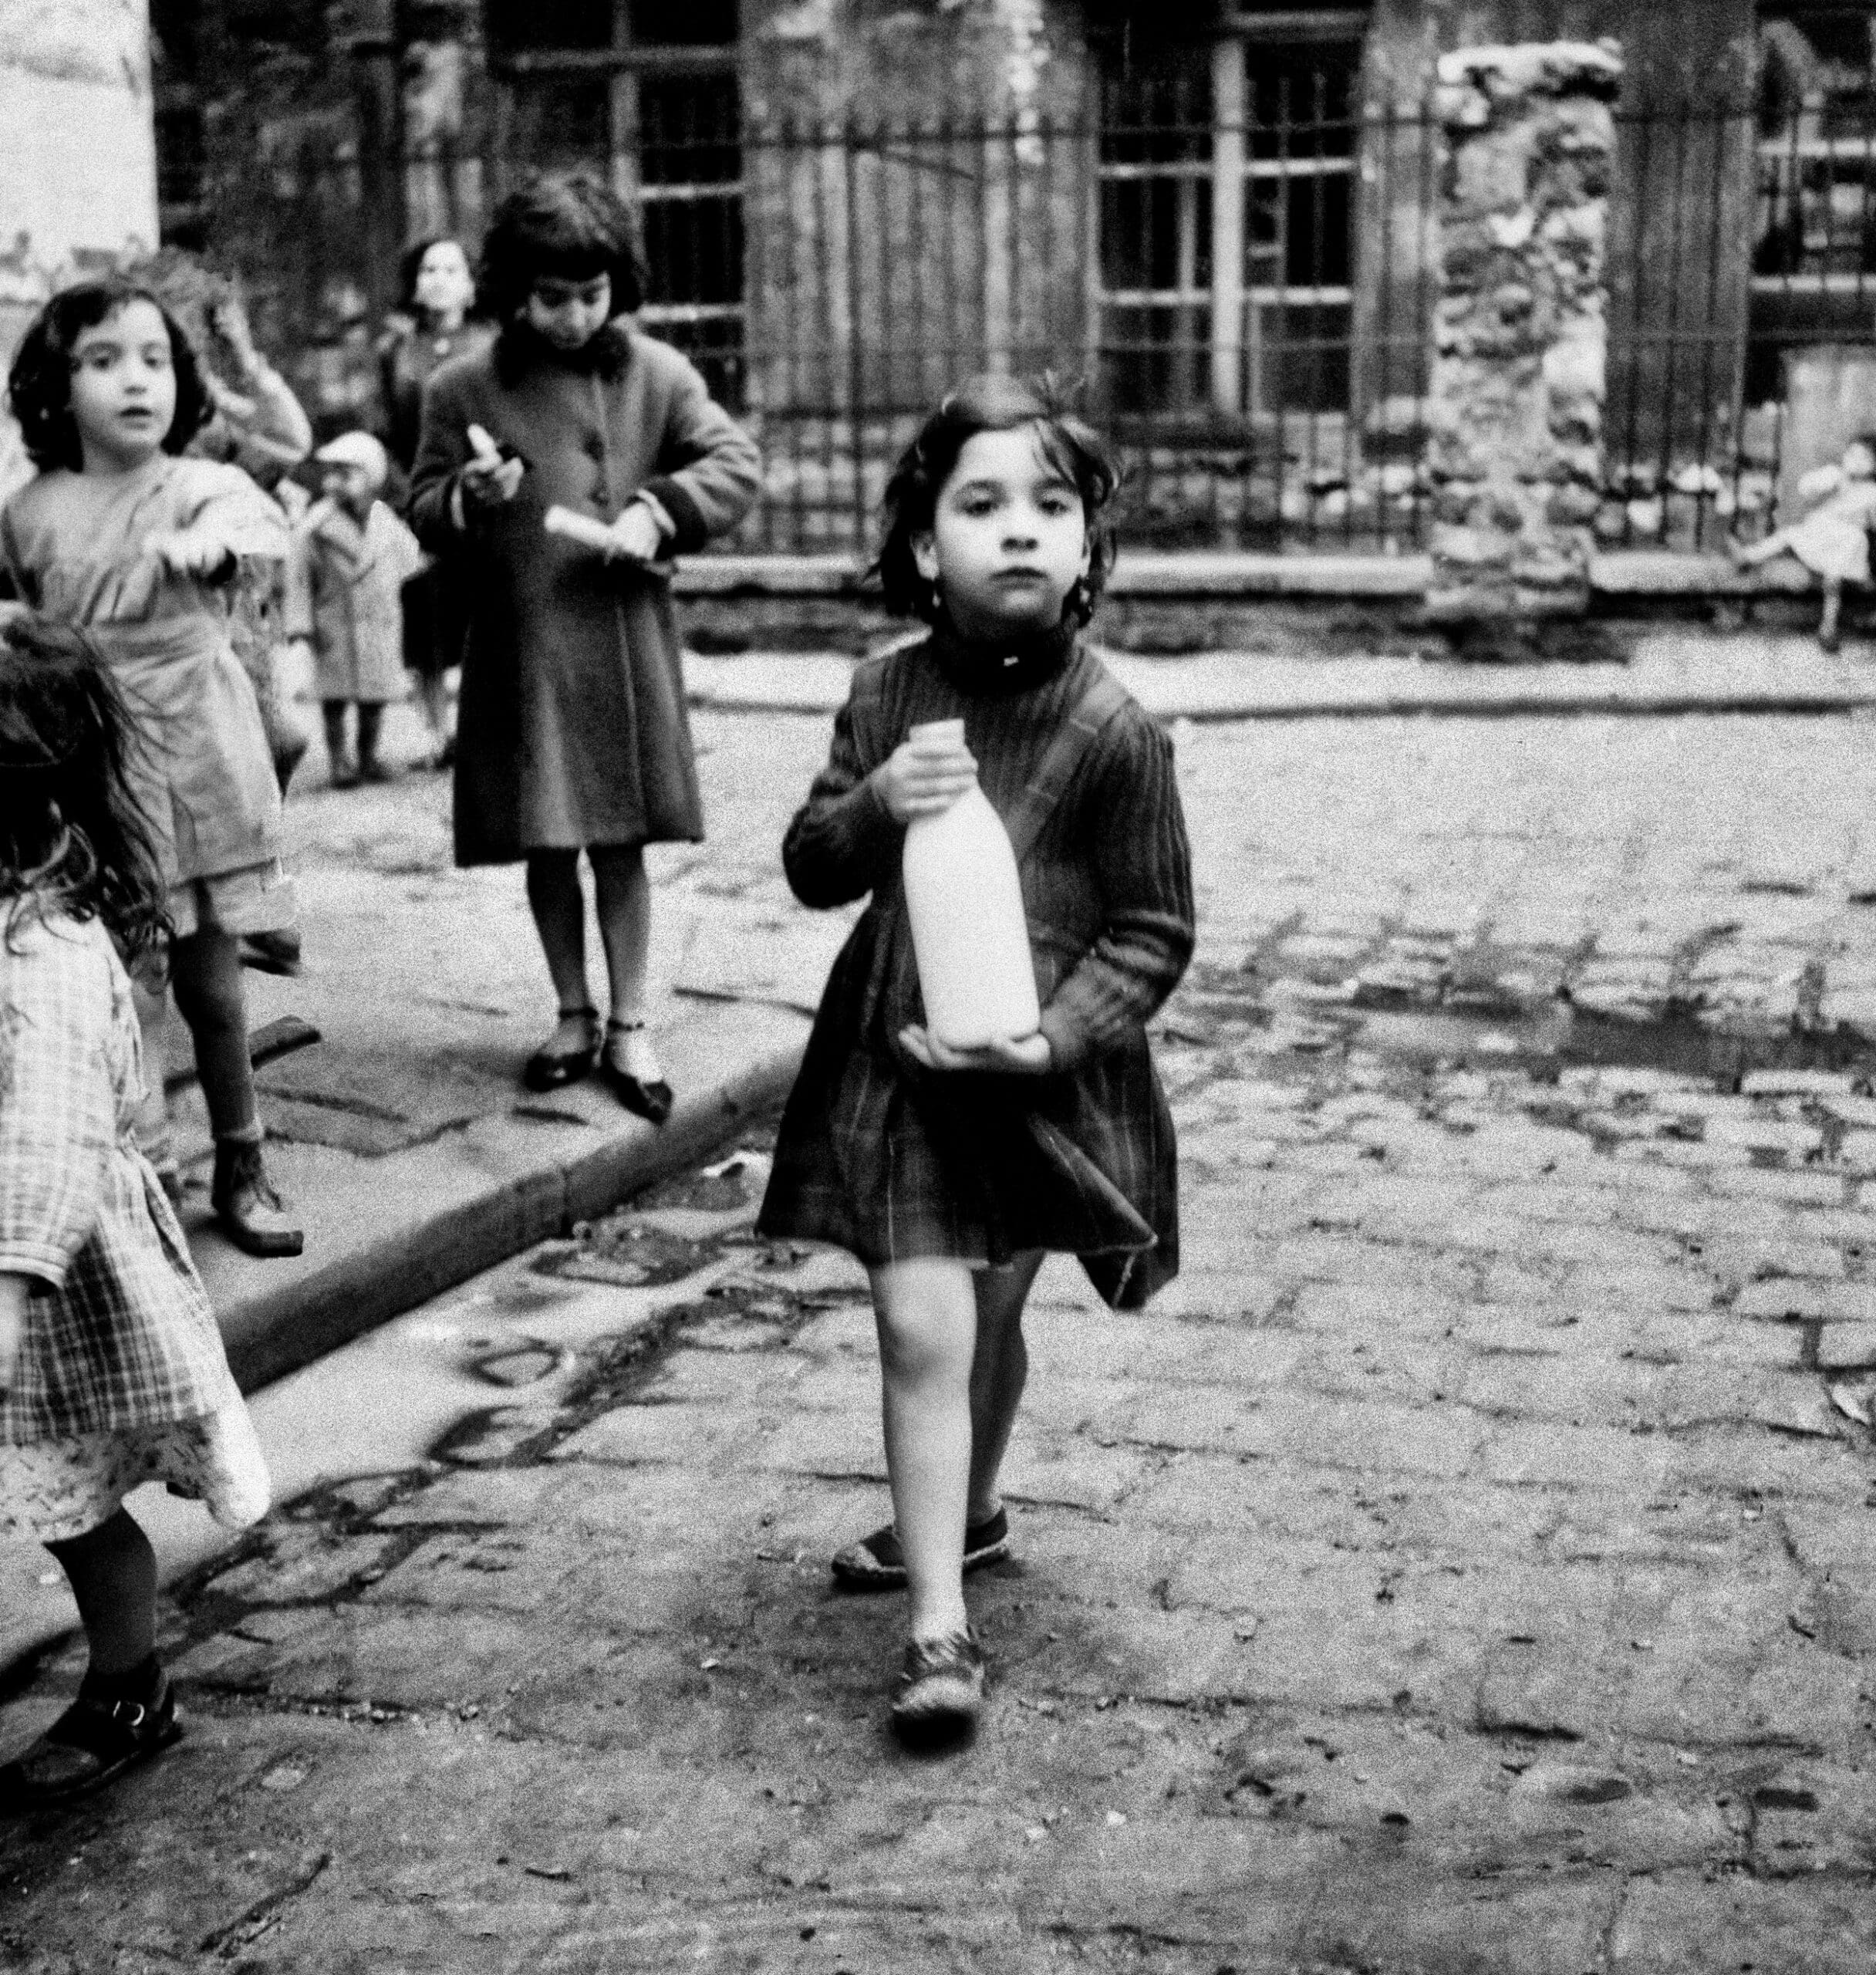 Marilyn Stafford. Girl with milk bottle, Cité Lesage-Bullourde, Paris, c1950. Silver gelatin print. Courtesy of the Marilyn Stafford Collective.